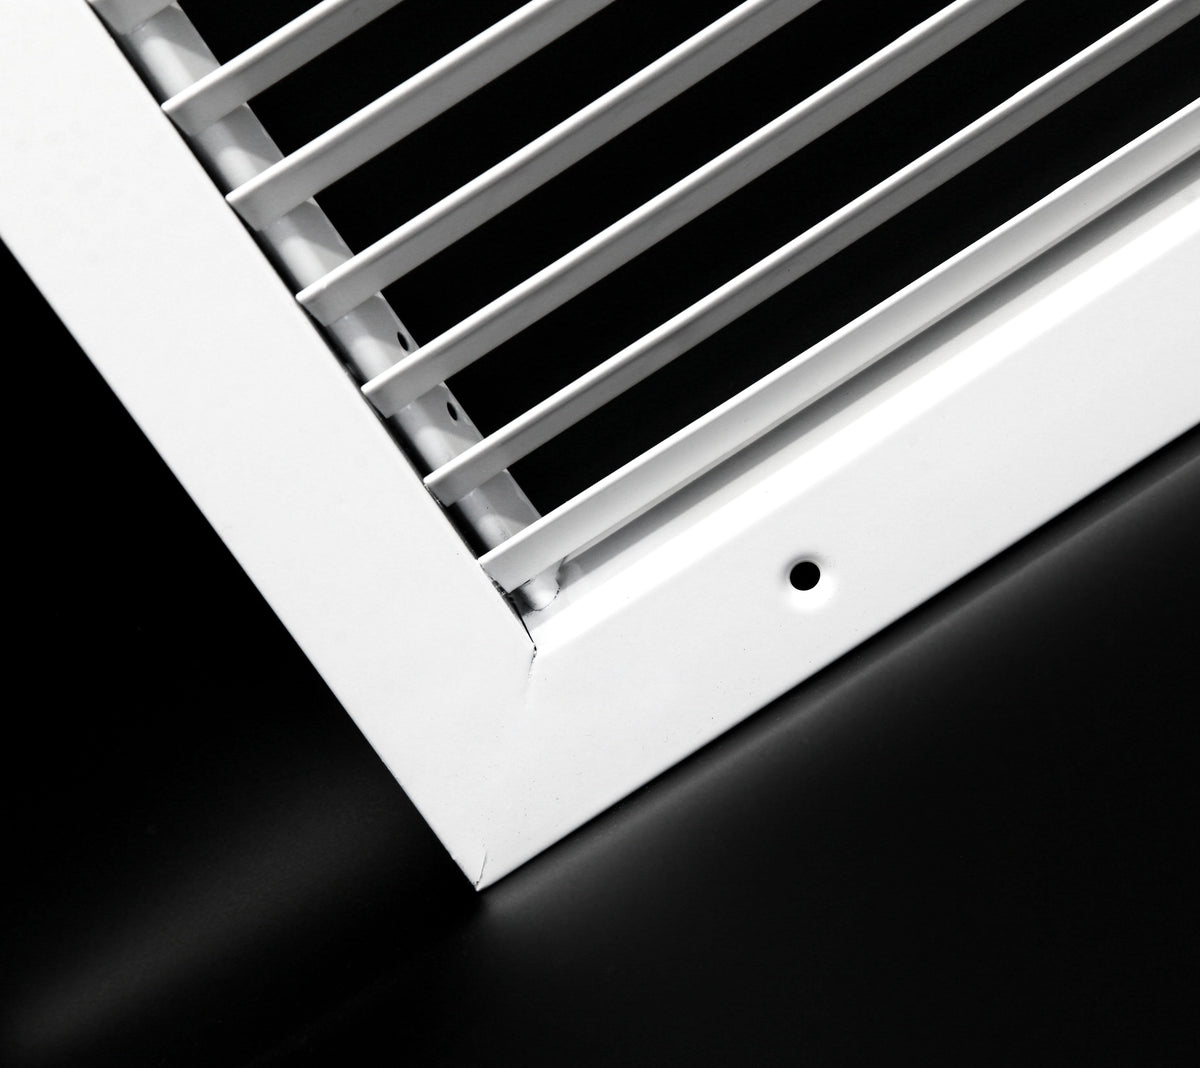 24&quot; X 12&quot; Air Vent Return Grilles - Sidewall and Ceiling